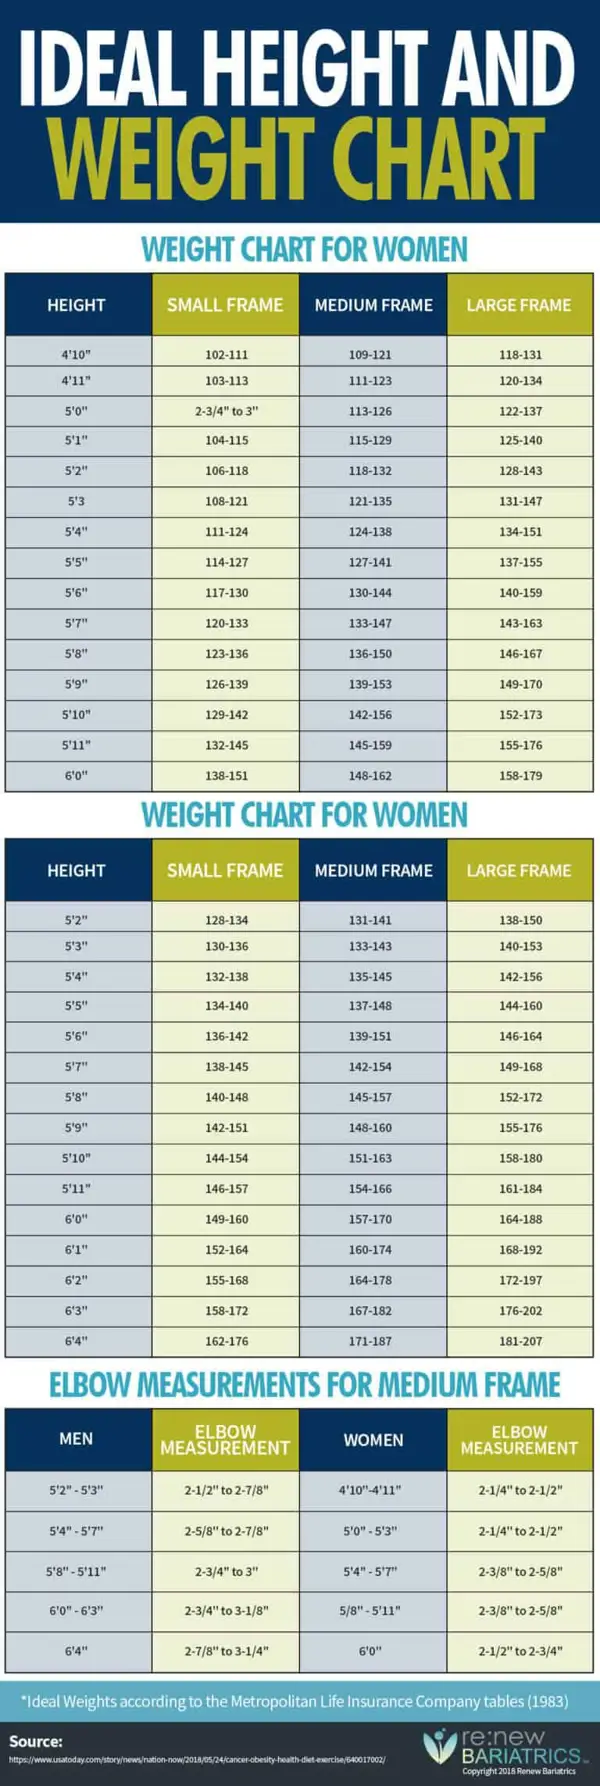 what is ideal height and weight chart